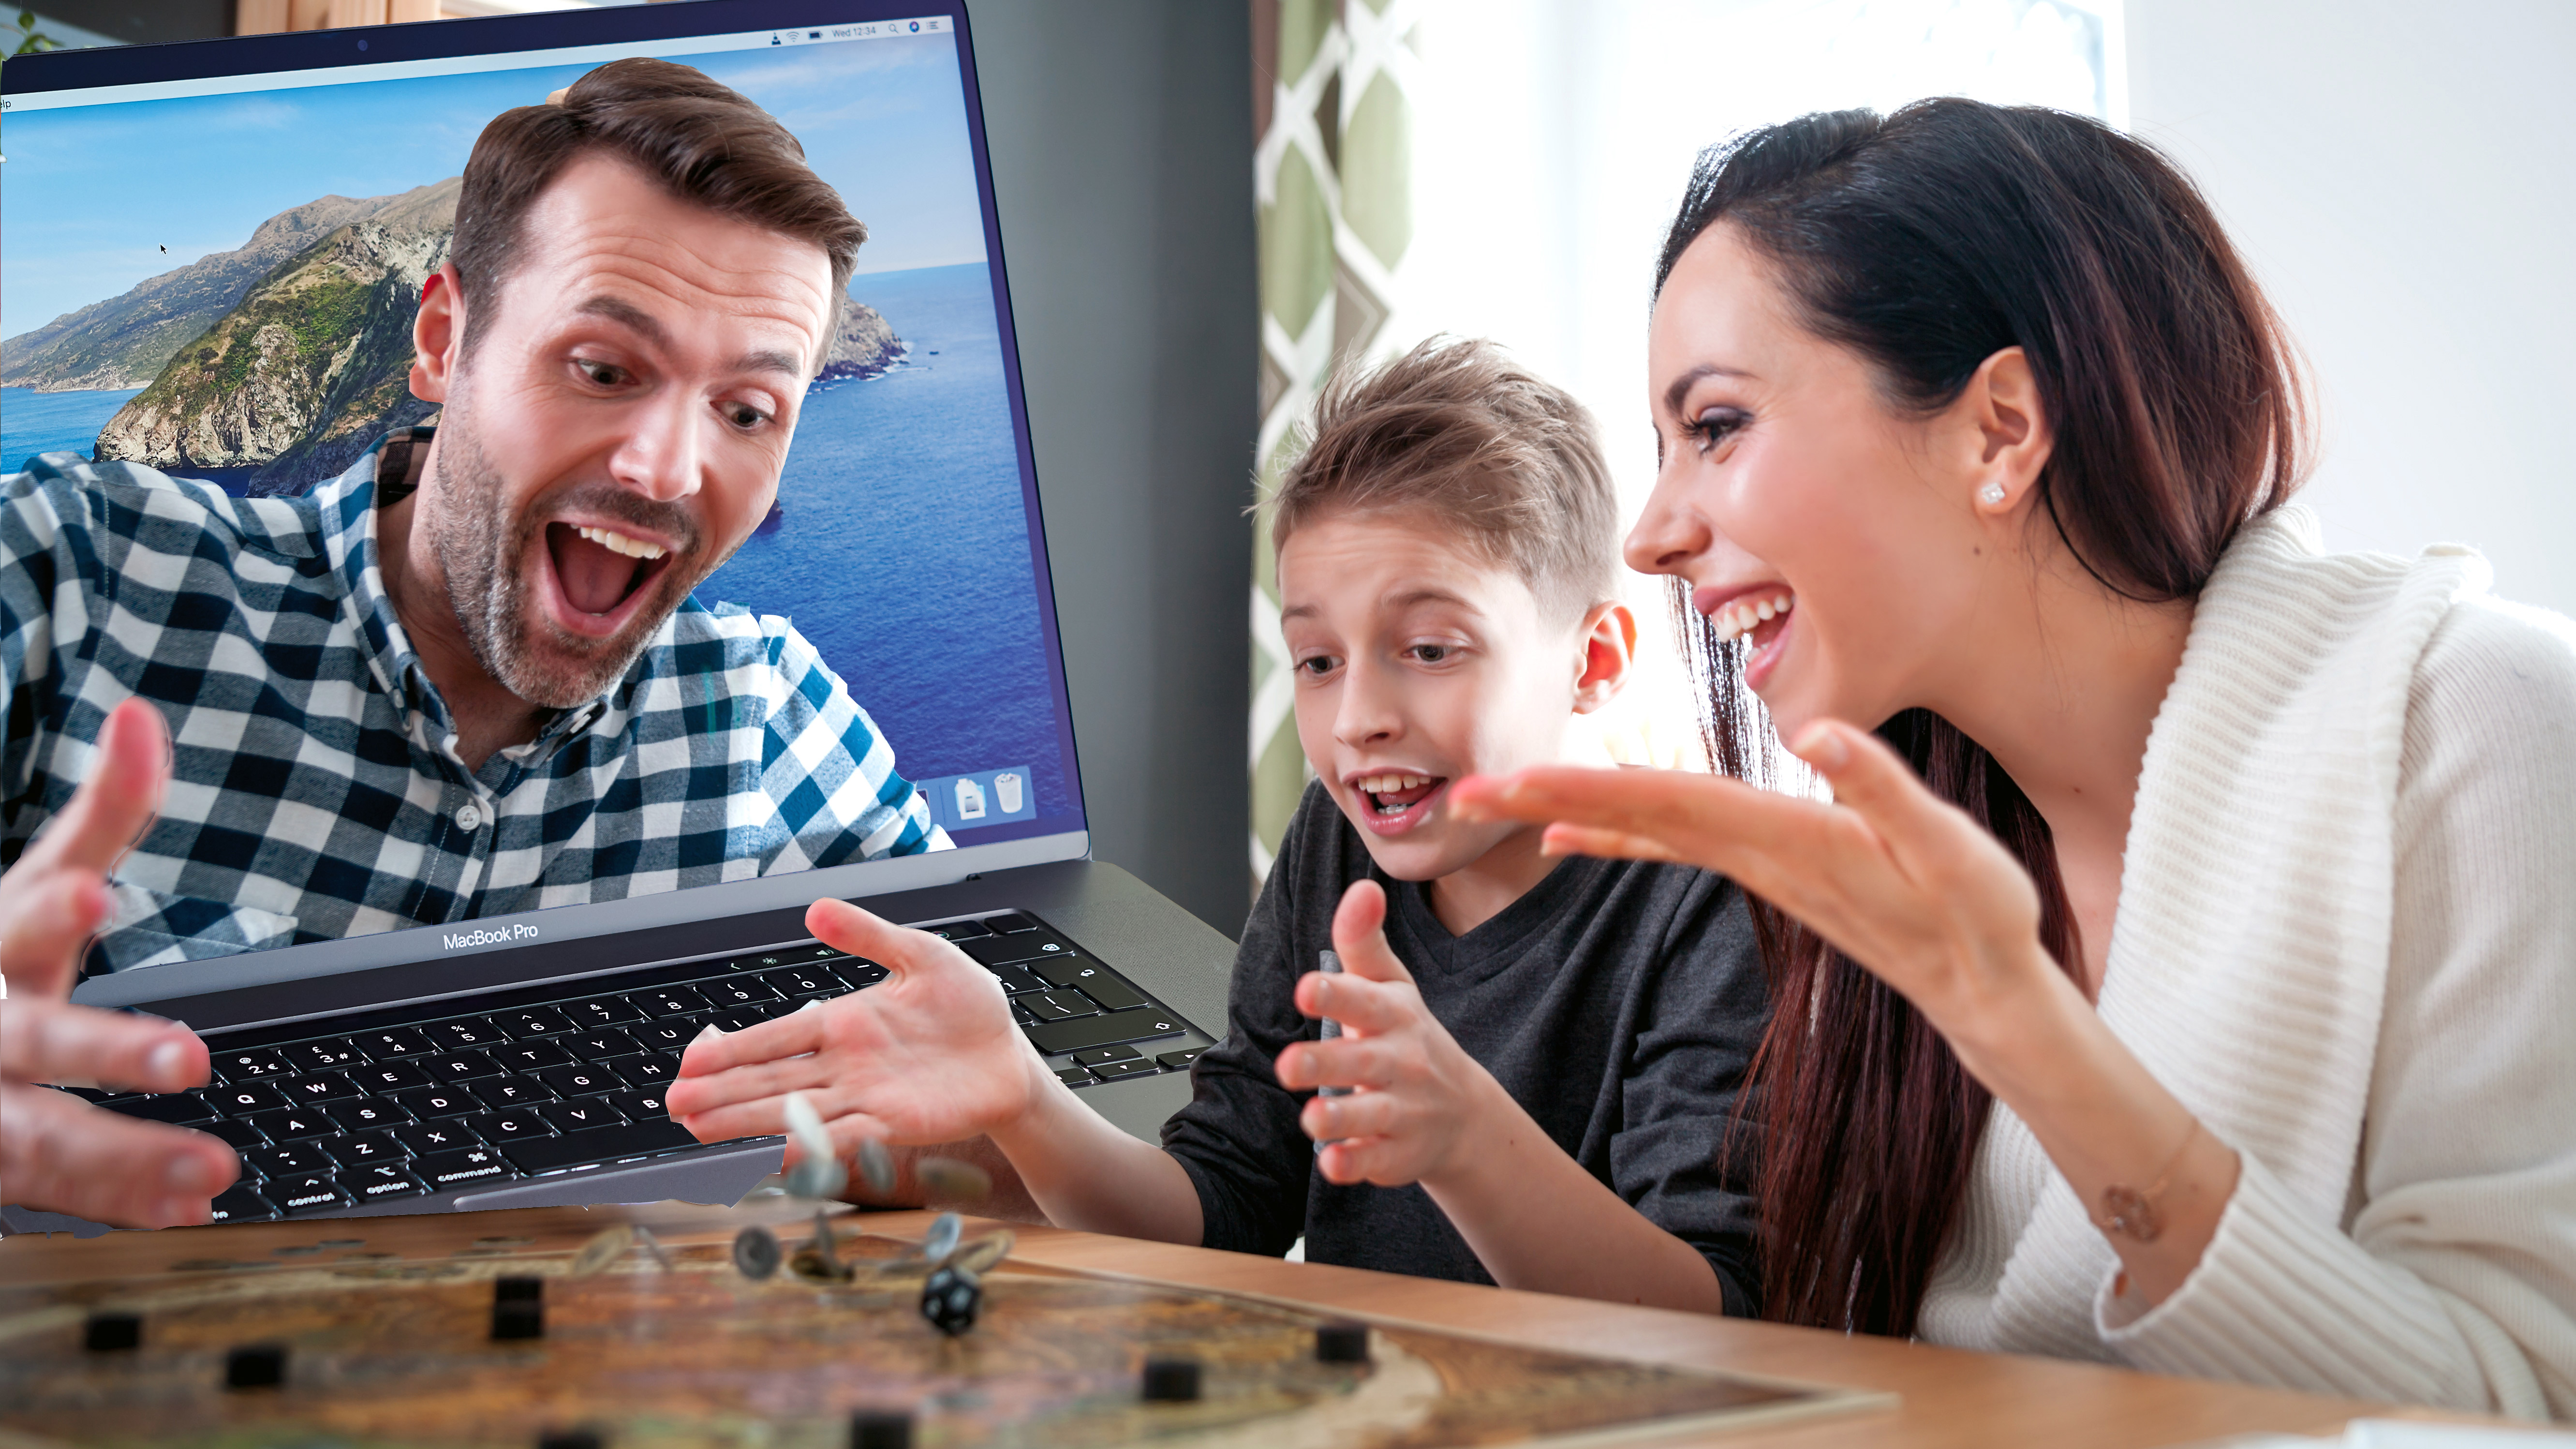 How To Play Board Games Online Play With Friends Or Family Over